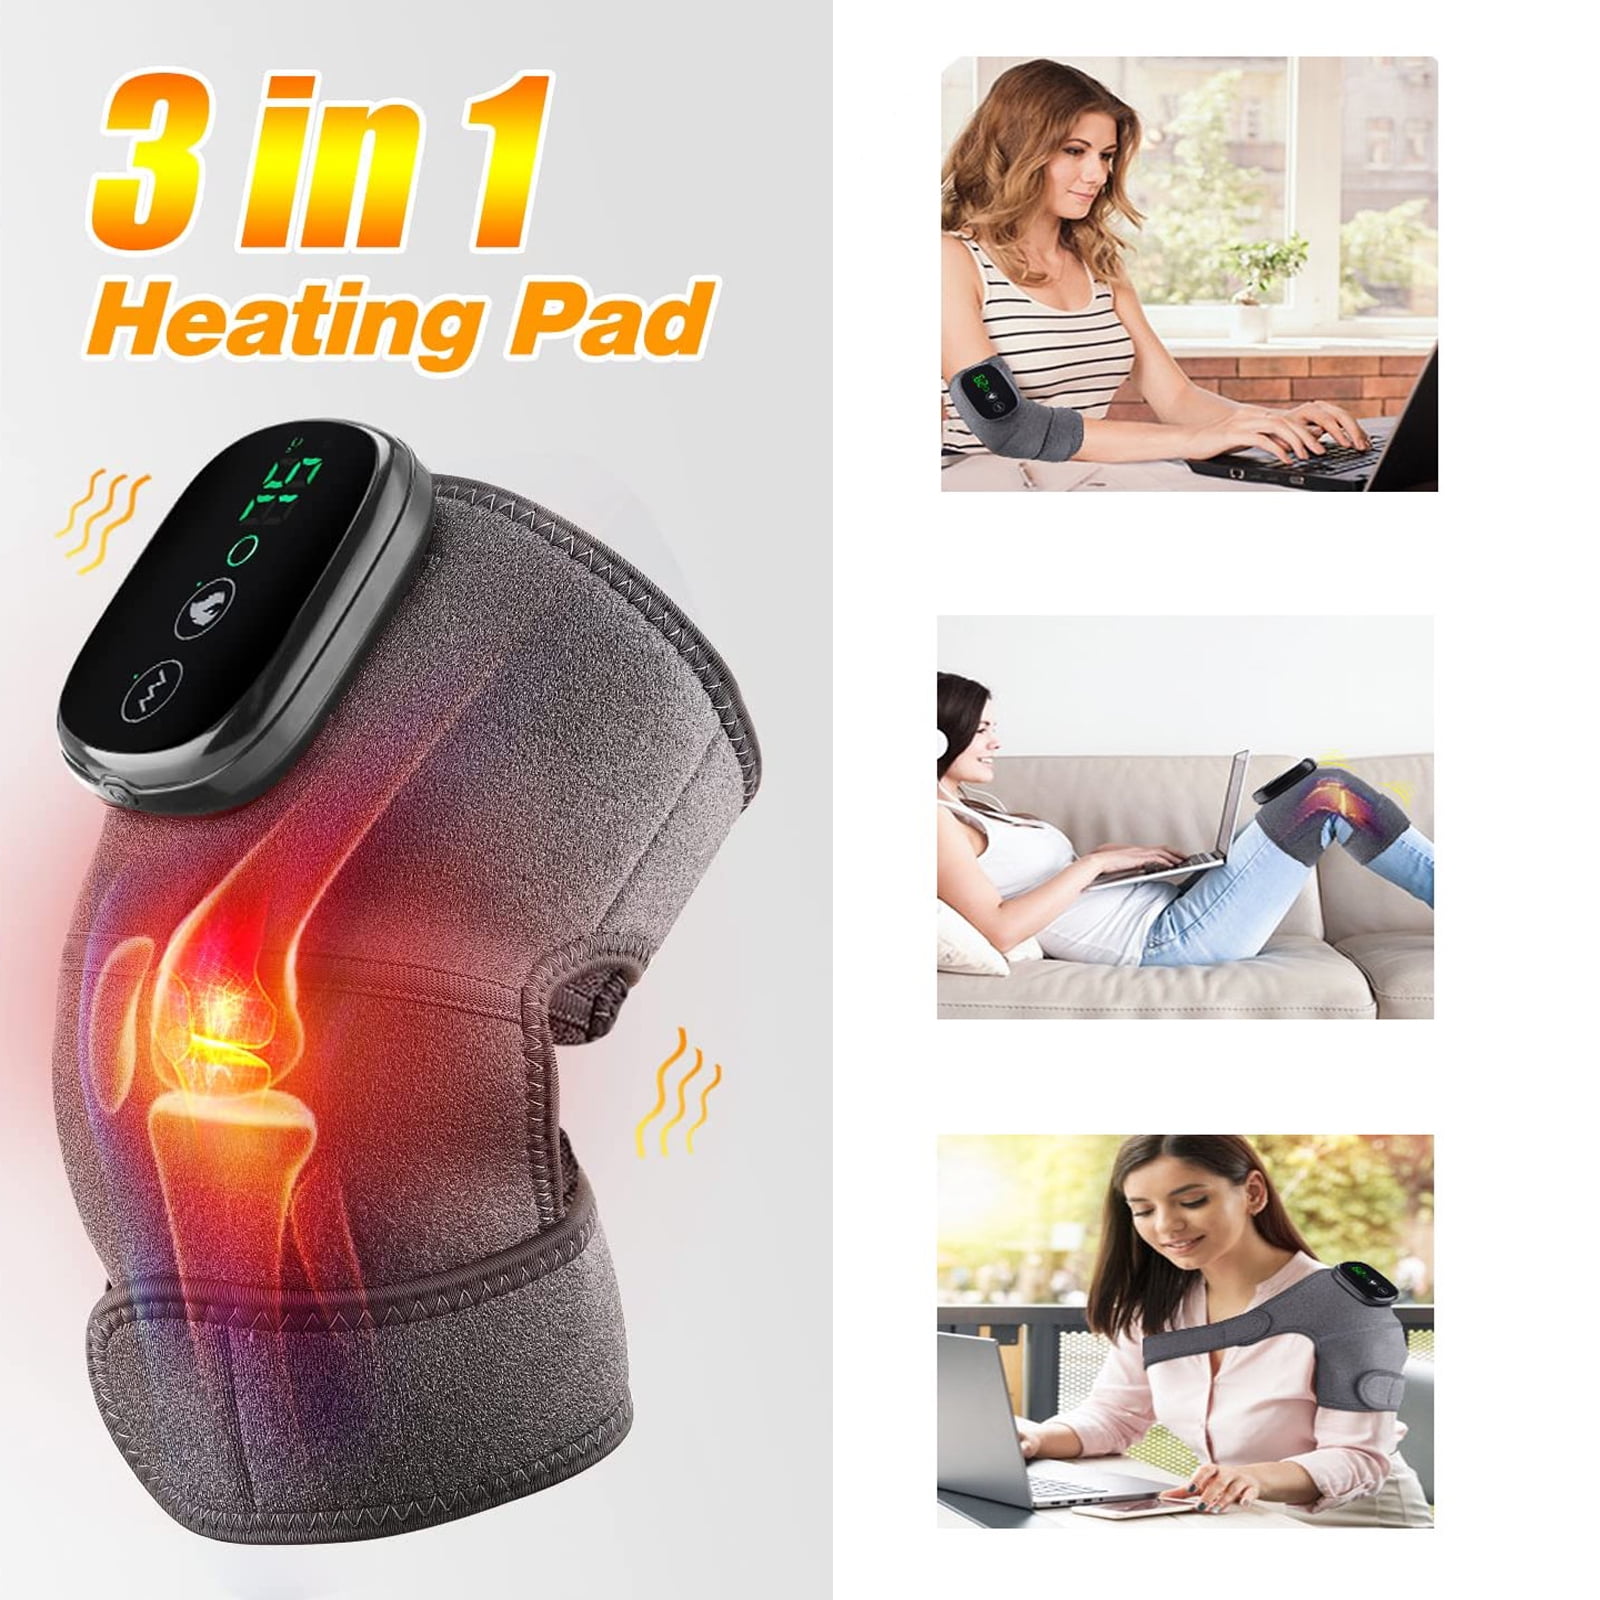 Comfier Cordless Knee Massager with Heat, Vibration Knee Brace Wrap for Arthritis Pain Relief, 3-in-1 Heating Pad for Knee Shoulder Elbow, Knee Warmer